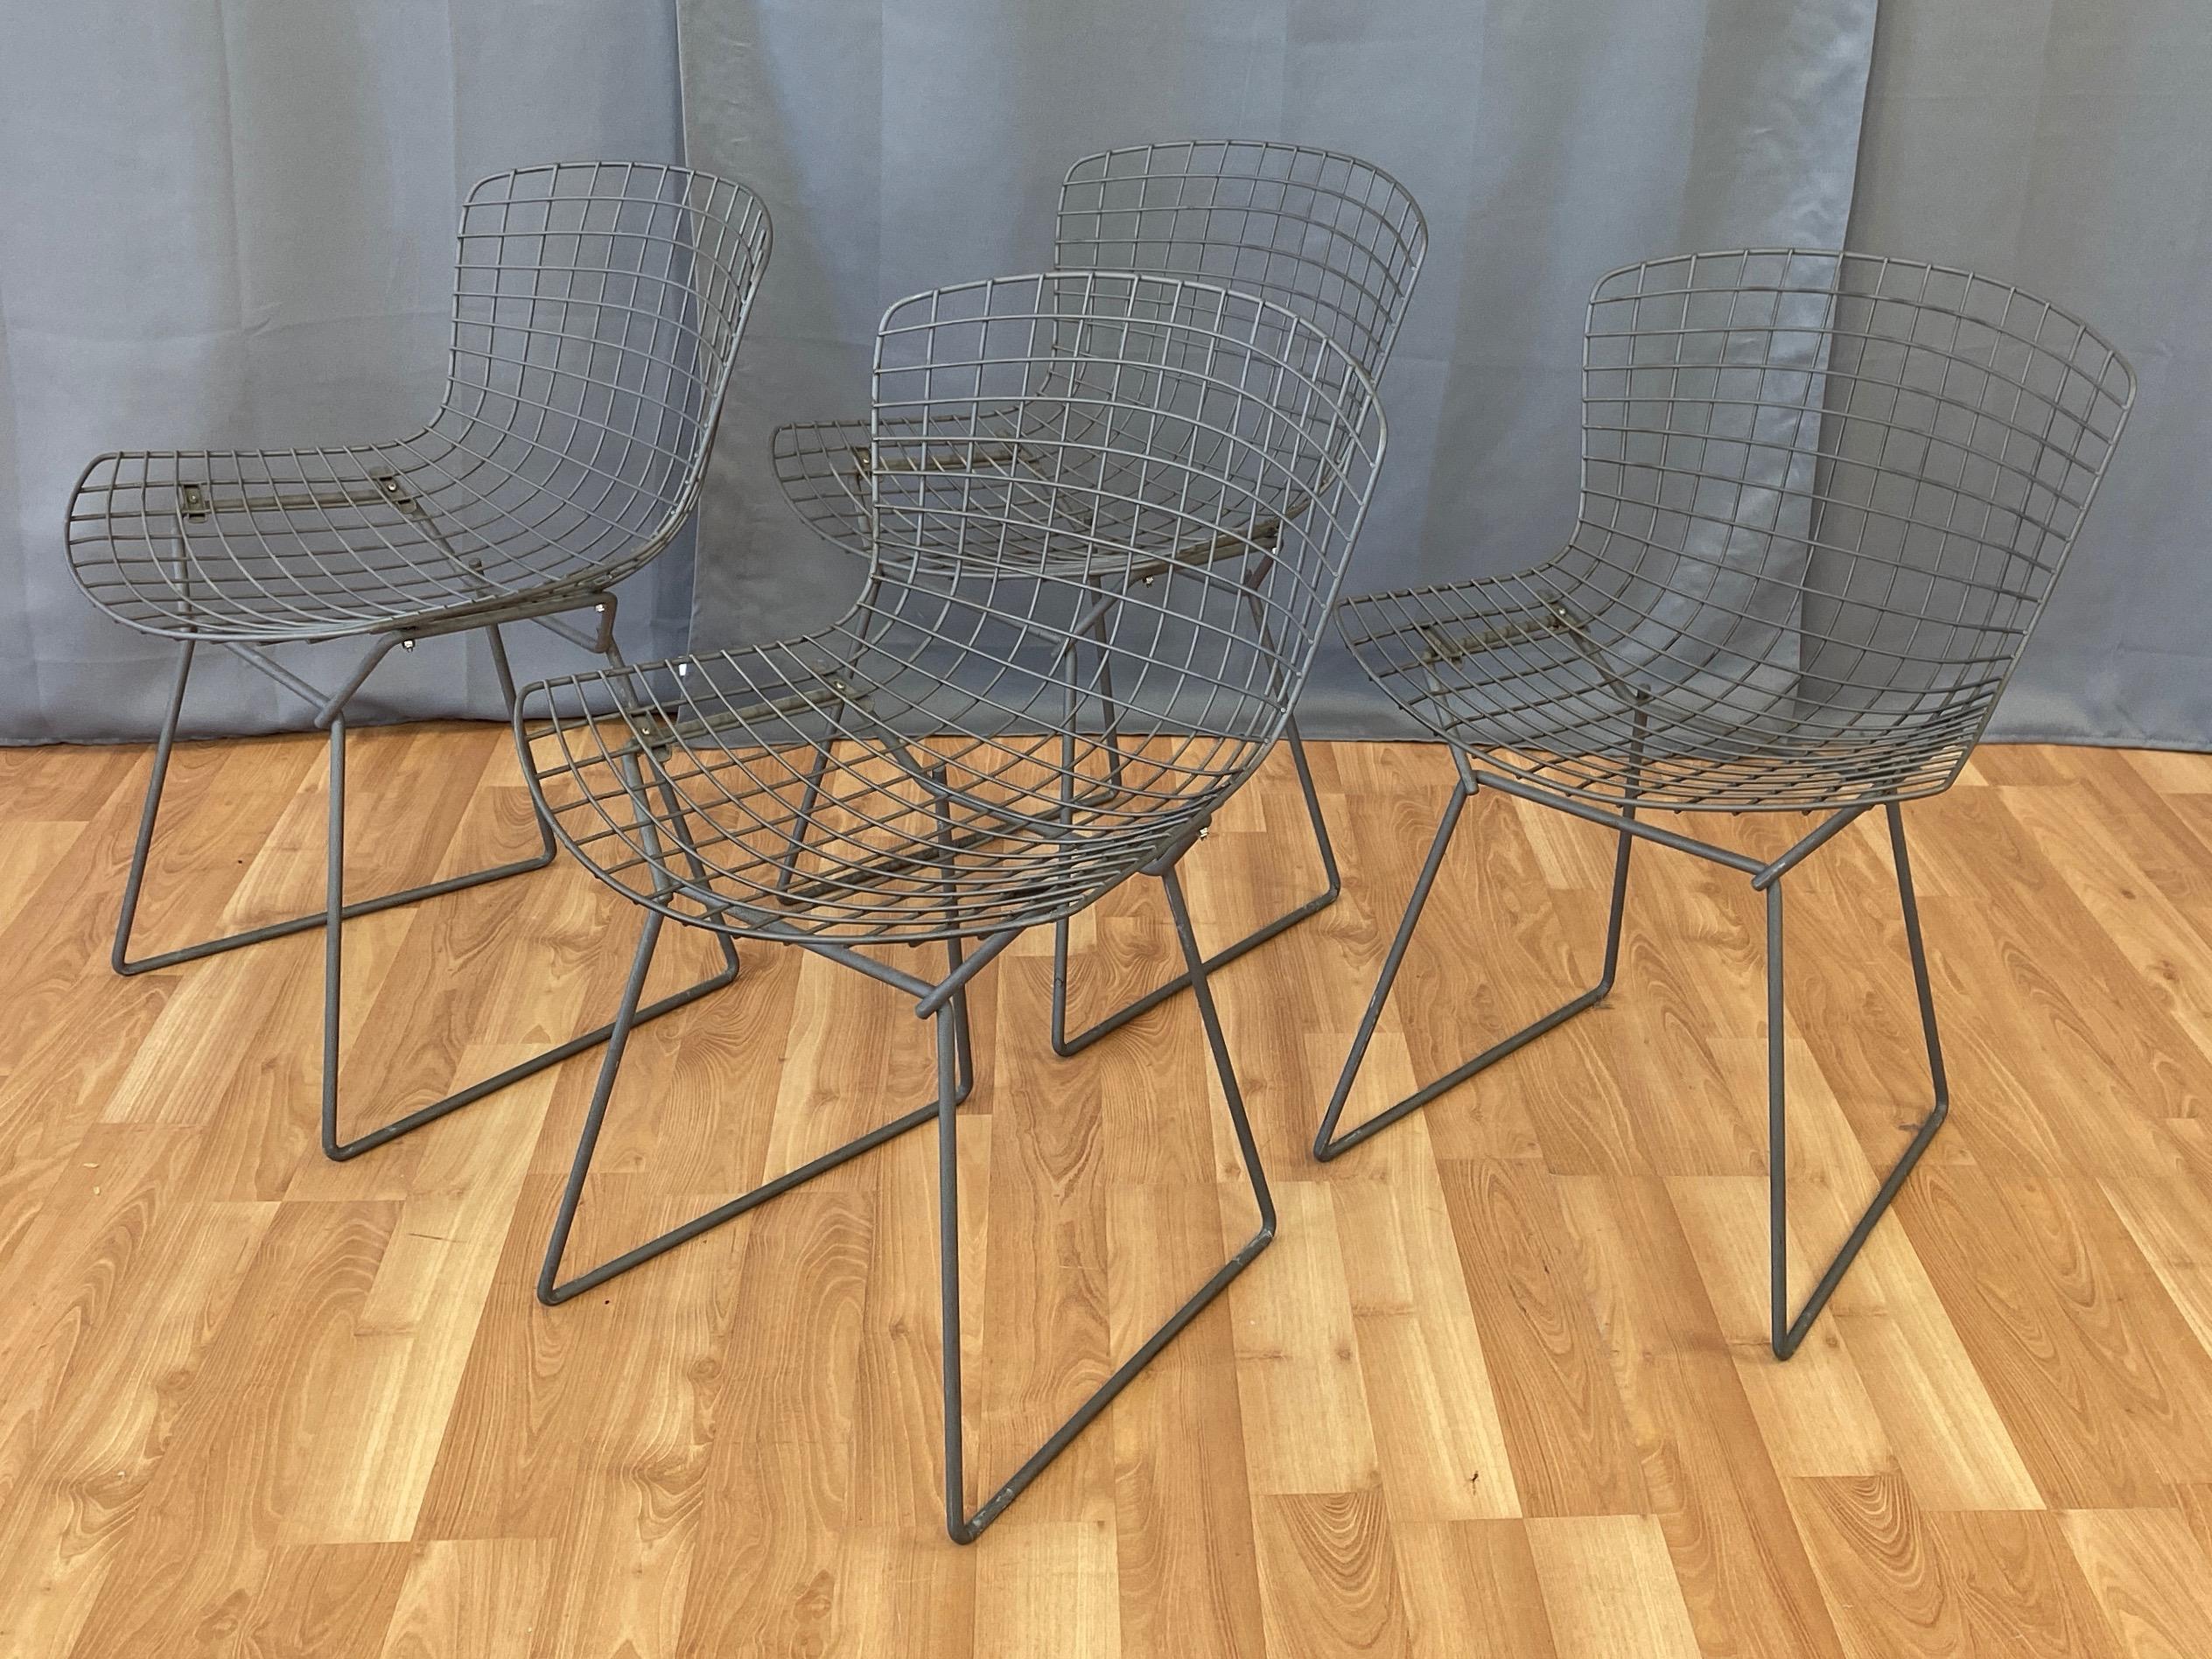 A set of four early 1980s grey 420C side chairs by Harry Bertoia for Knoll.

Released in 1952, this indispensable Mid-Century Modern icon earned Bertoia the 1955 Designer of the Year award, and has proven itself a versatile and durable seating